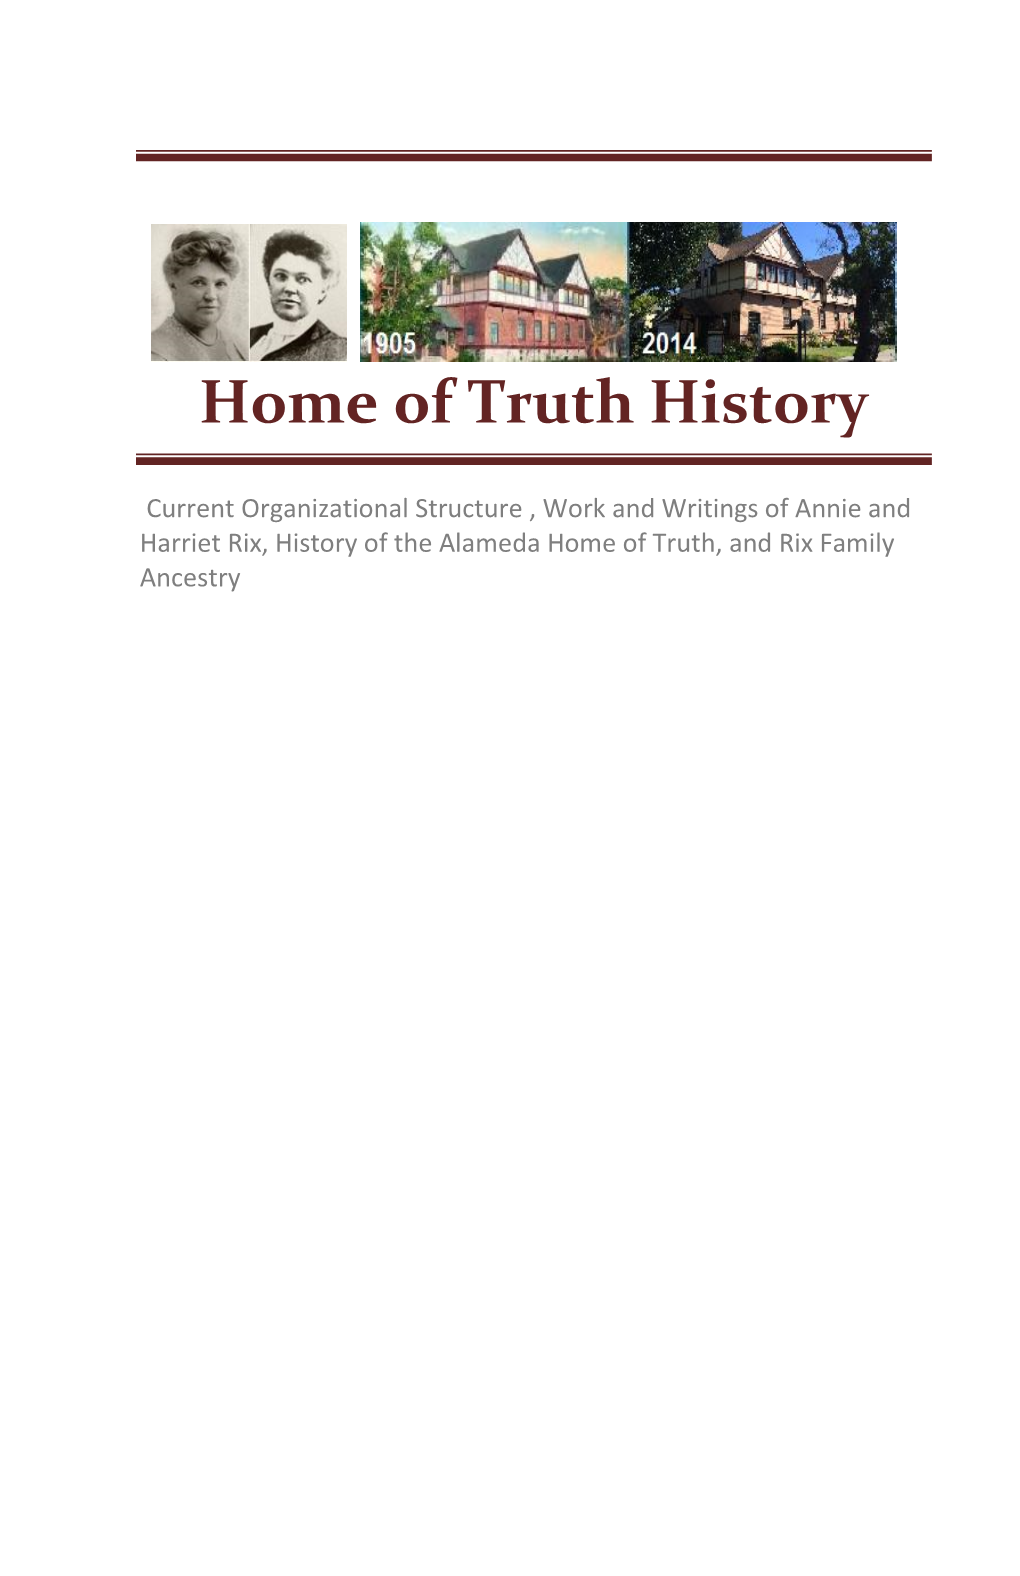 Home of Truth History